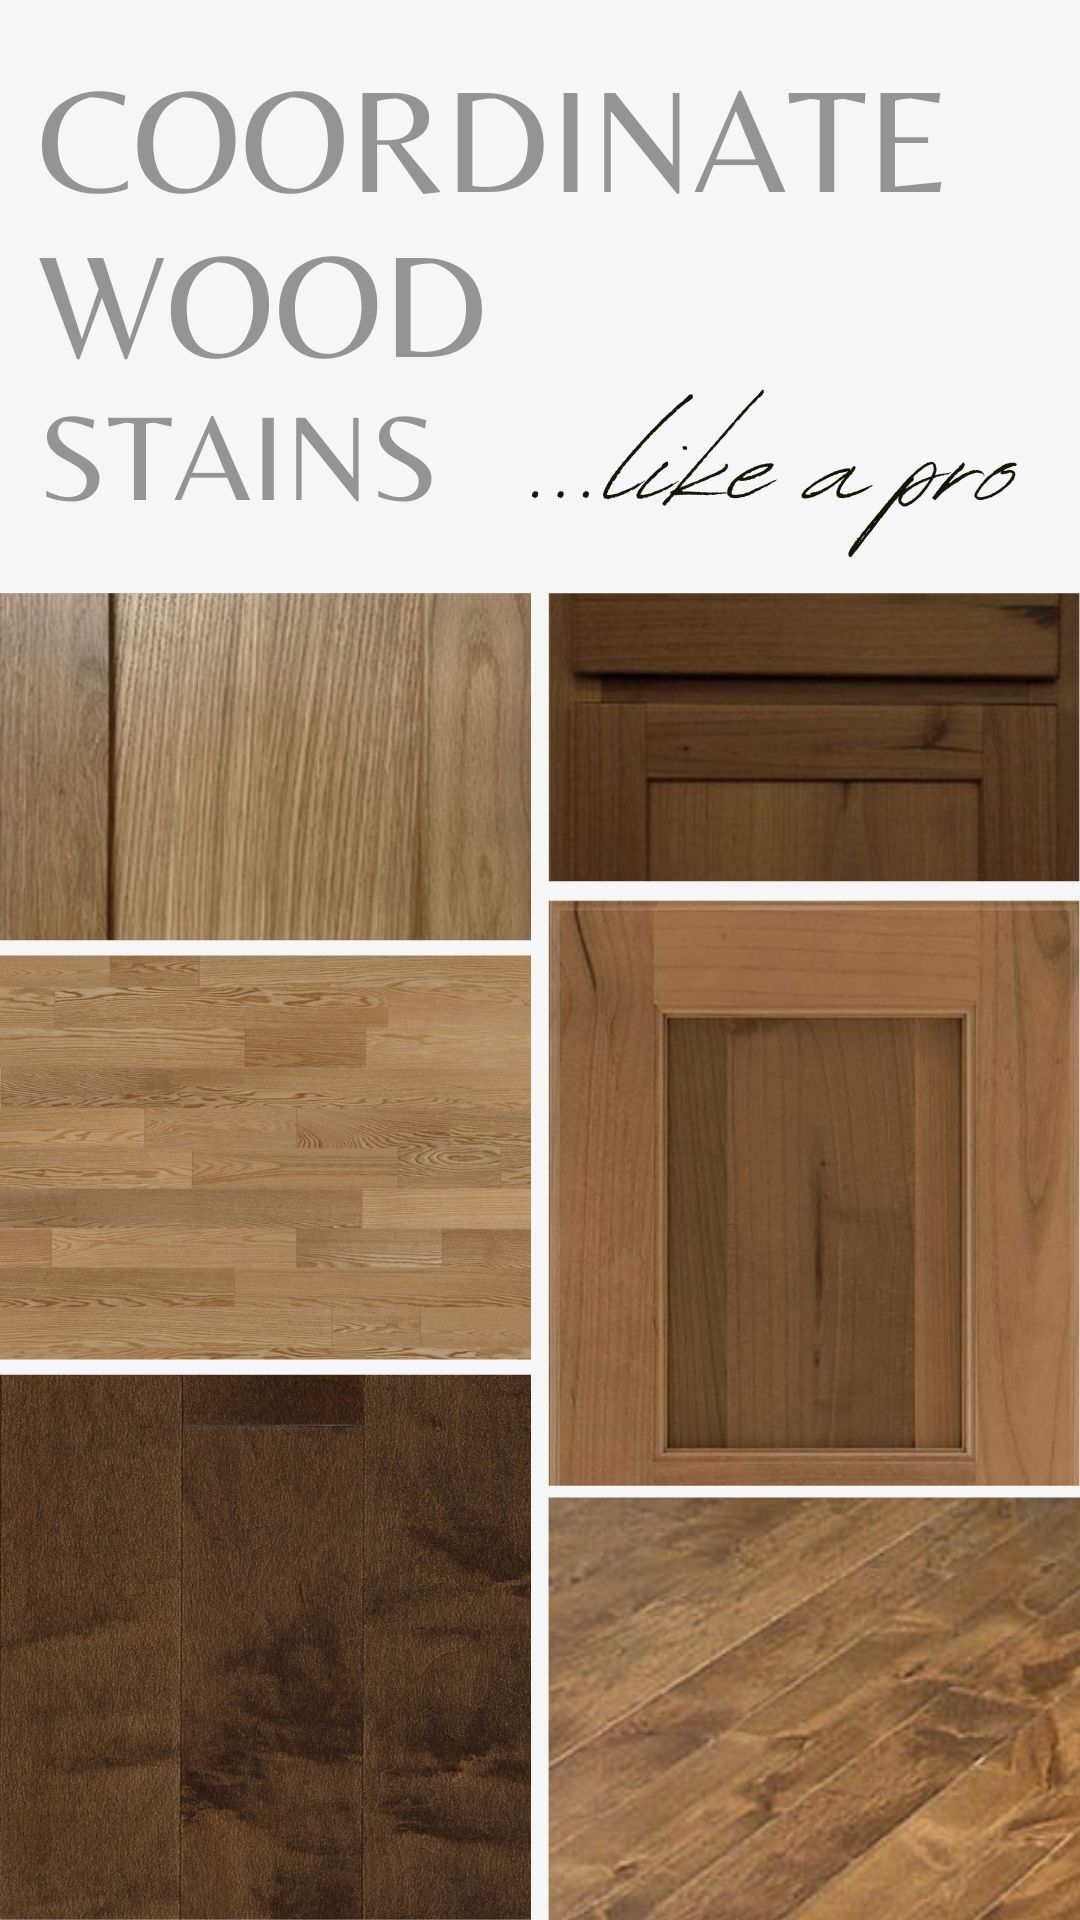 how to coordinate and match different wood stains and tones, maple, cherry, oak, alder, pine. Wood floor, wood cabinets, wood furniture, trim Kylie M Interiors Edesign, diy blogger